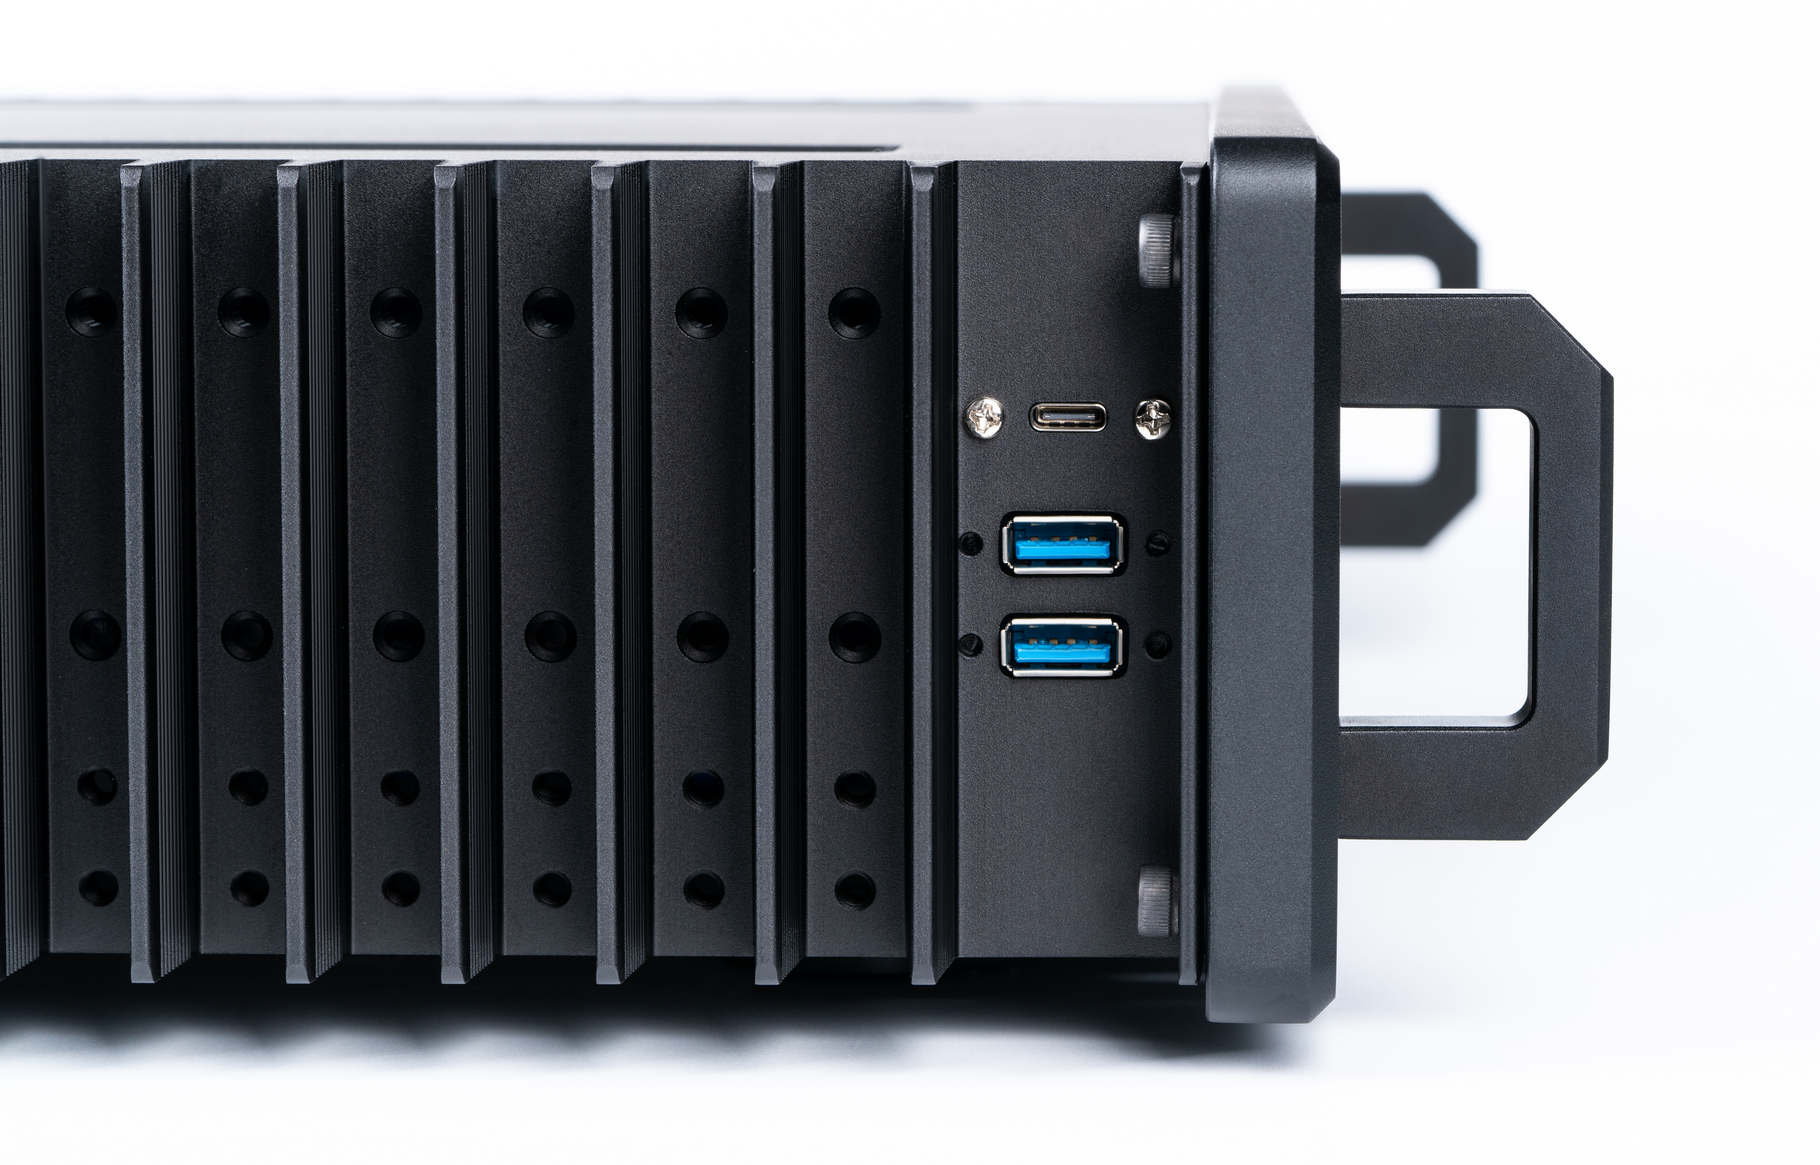 HDPLEX H5 Fanless HTPC Chassis has USB 3.1 Type C Port for Side I/O